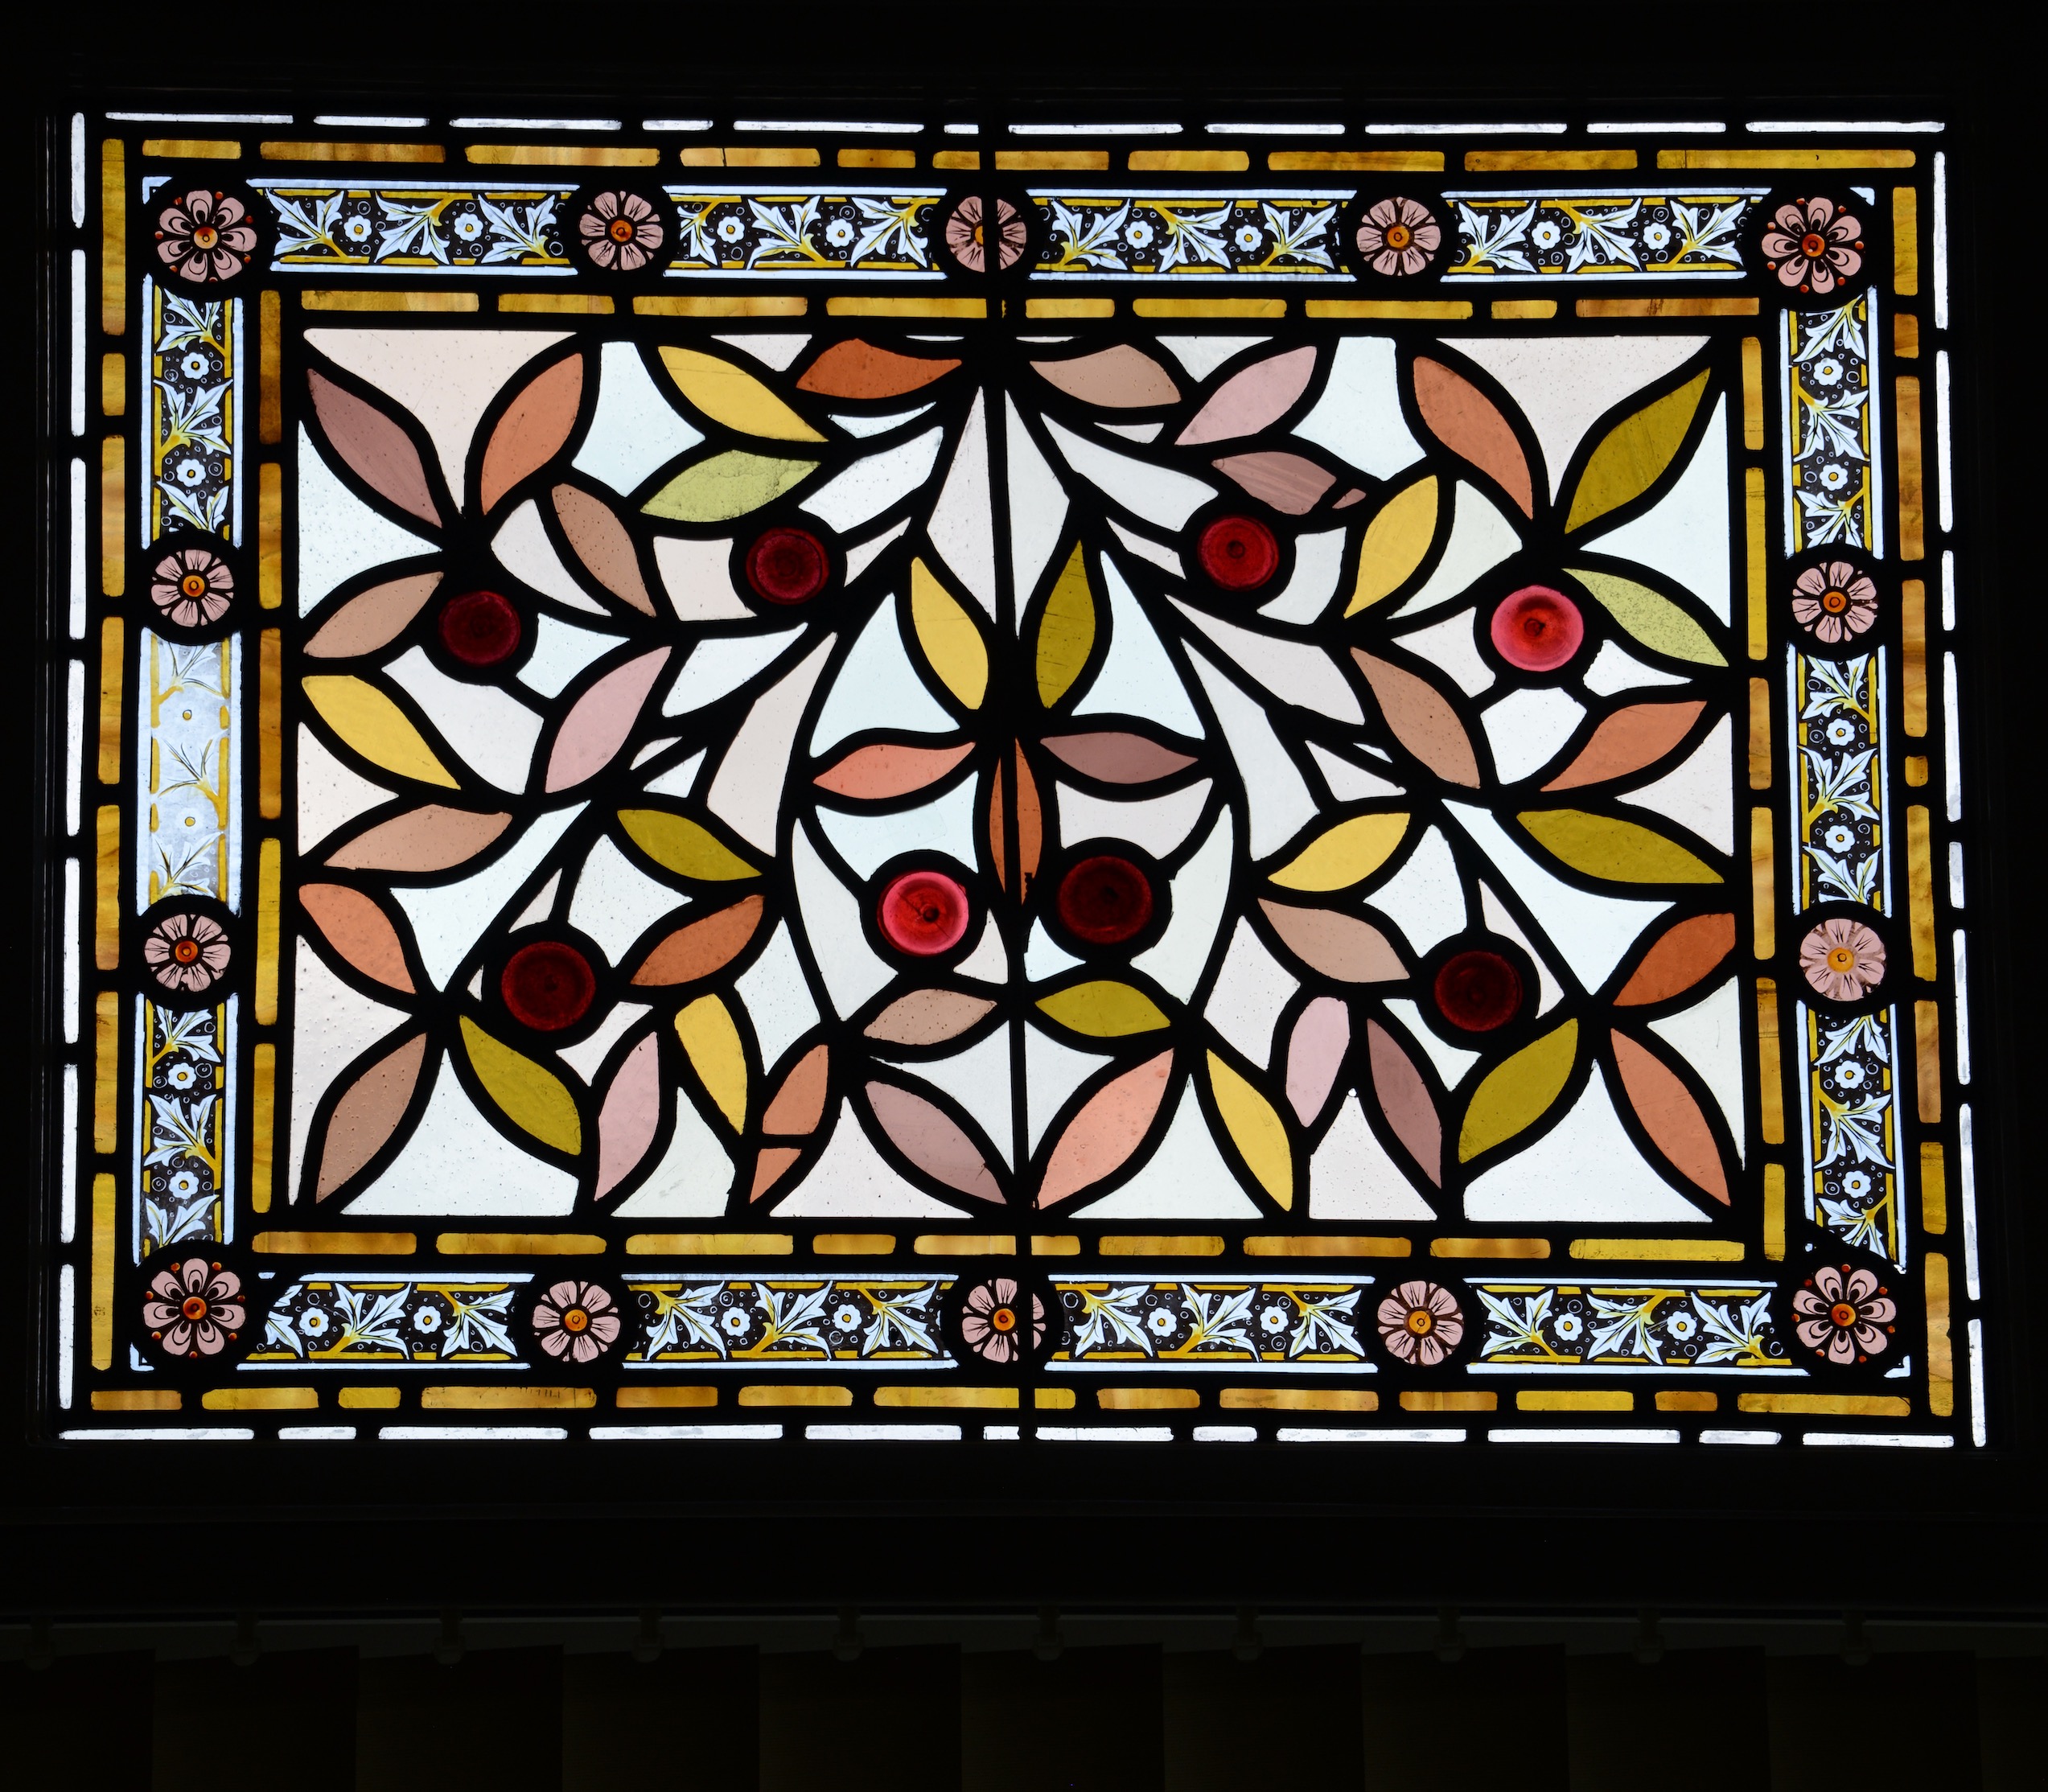 Stained glass at what is now the Danish Youth Hostel in London